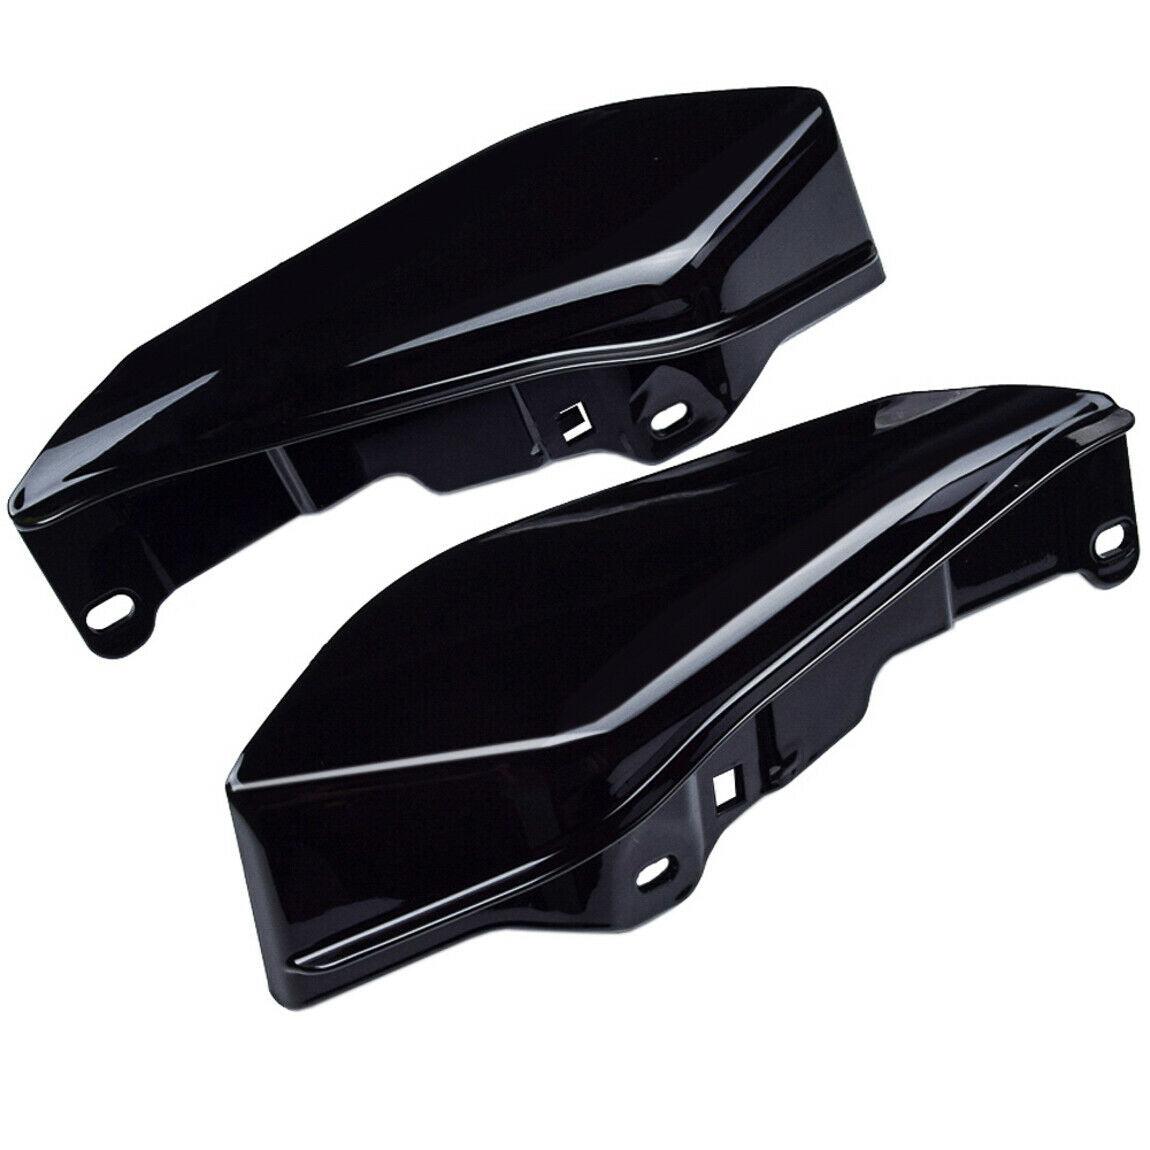 Pair Black Mid Frame Air Deflector Heat Shield Fit for Harley Street Glide 09-21 - Moto Life Products